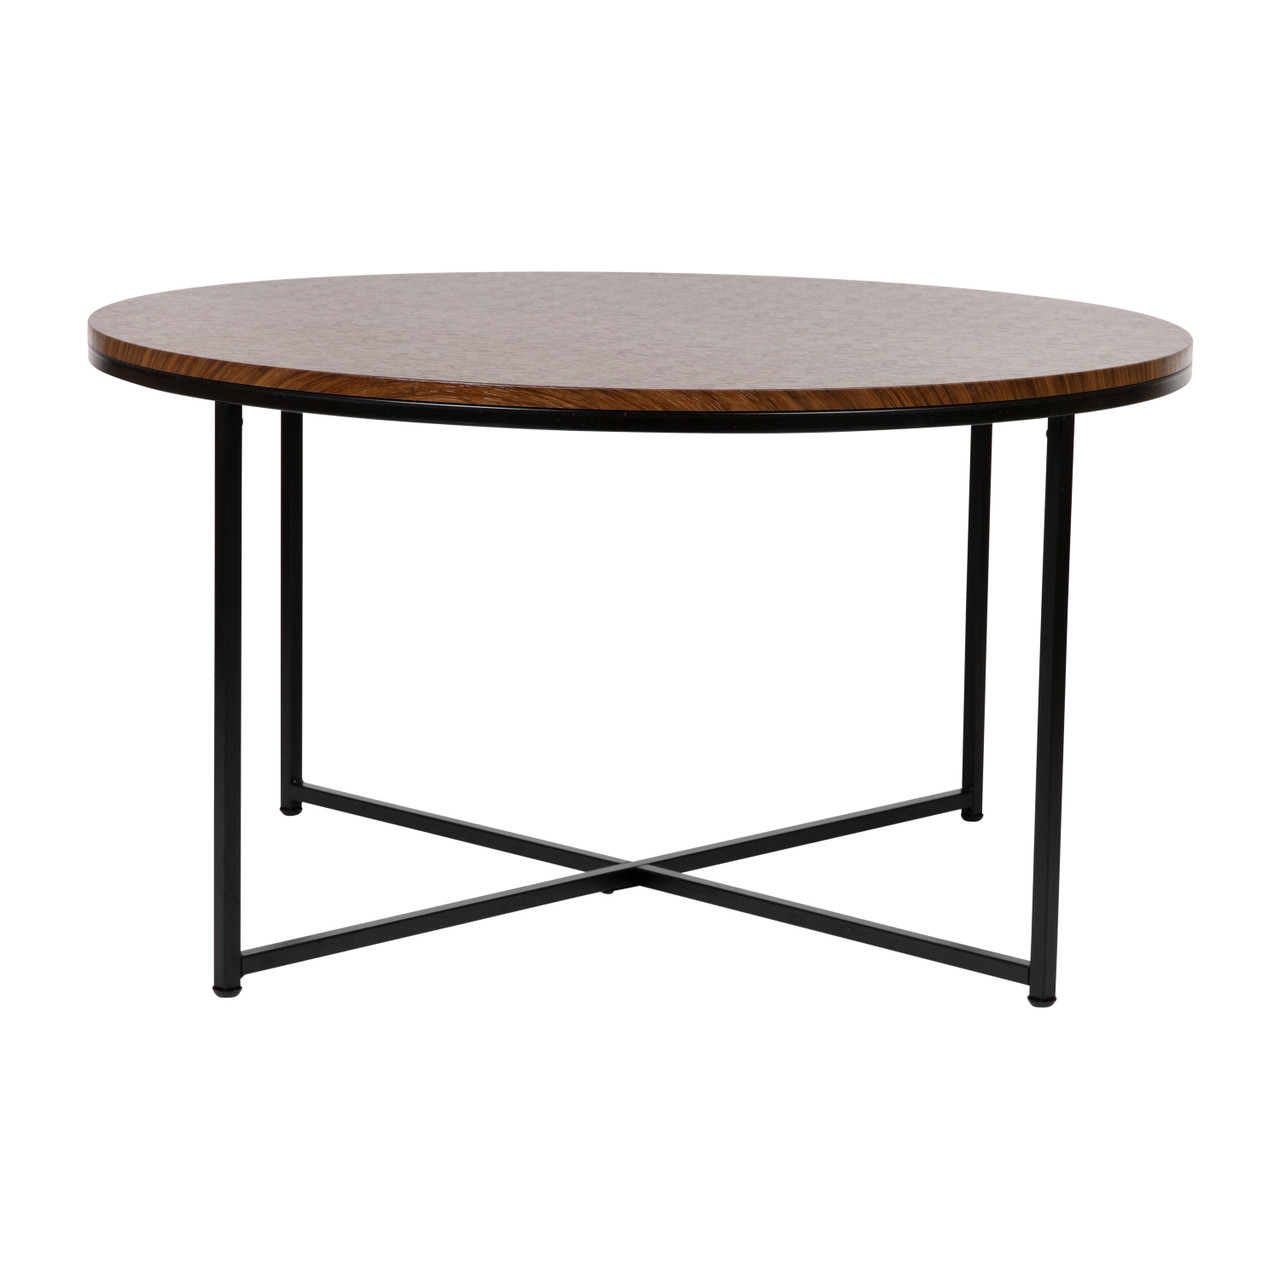 Flash Furniture Hampstead Collection Coffee Table Modern Walnut Finish Accent Table with Crisscross Matte Black Frame, Model# NAN-JH-1787CT-WAL-BK-GG